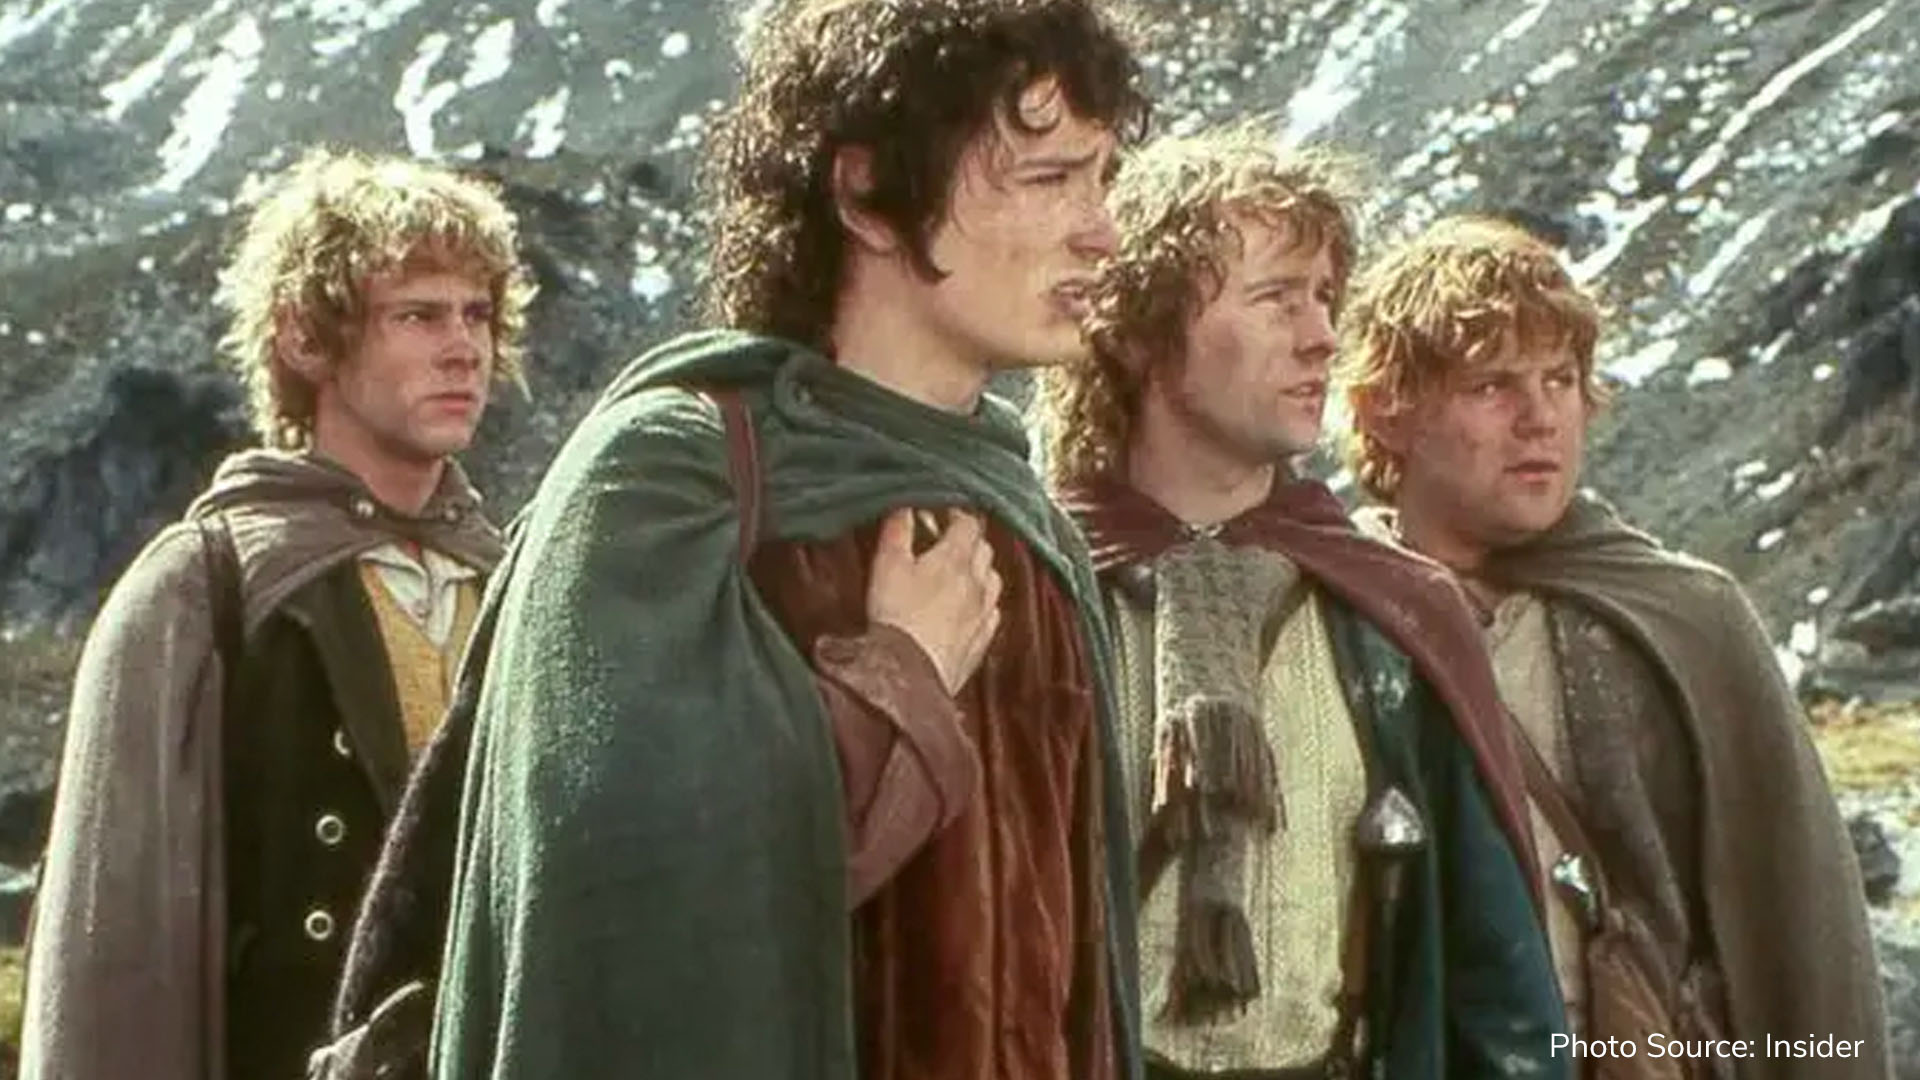 The Lord of the Rings series to cost $465 million for first season